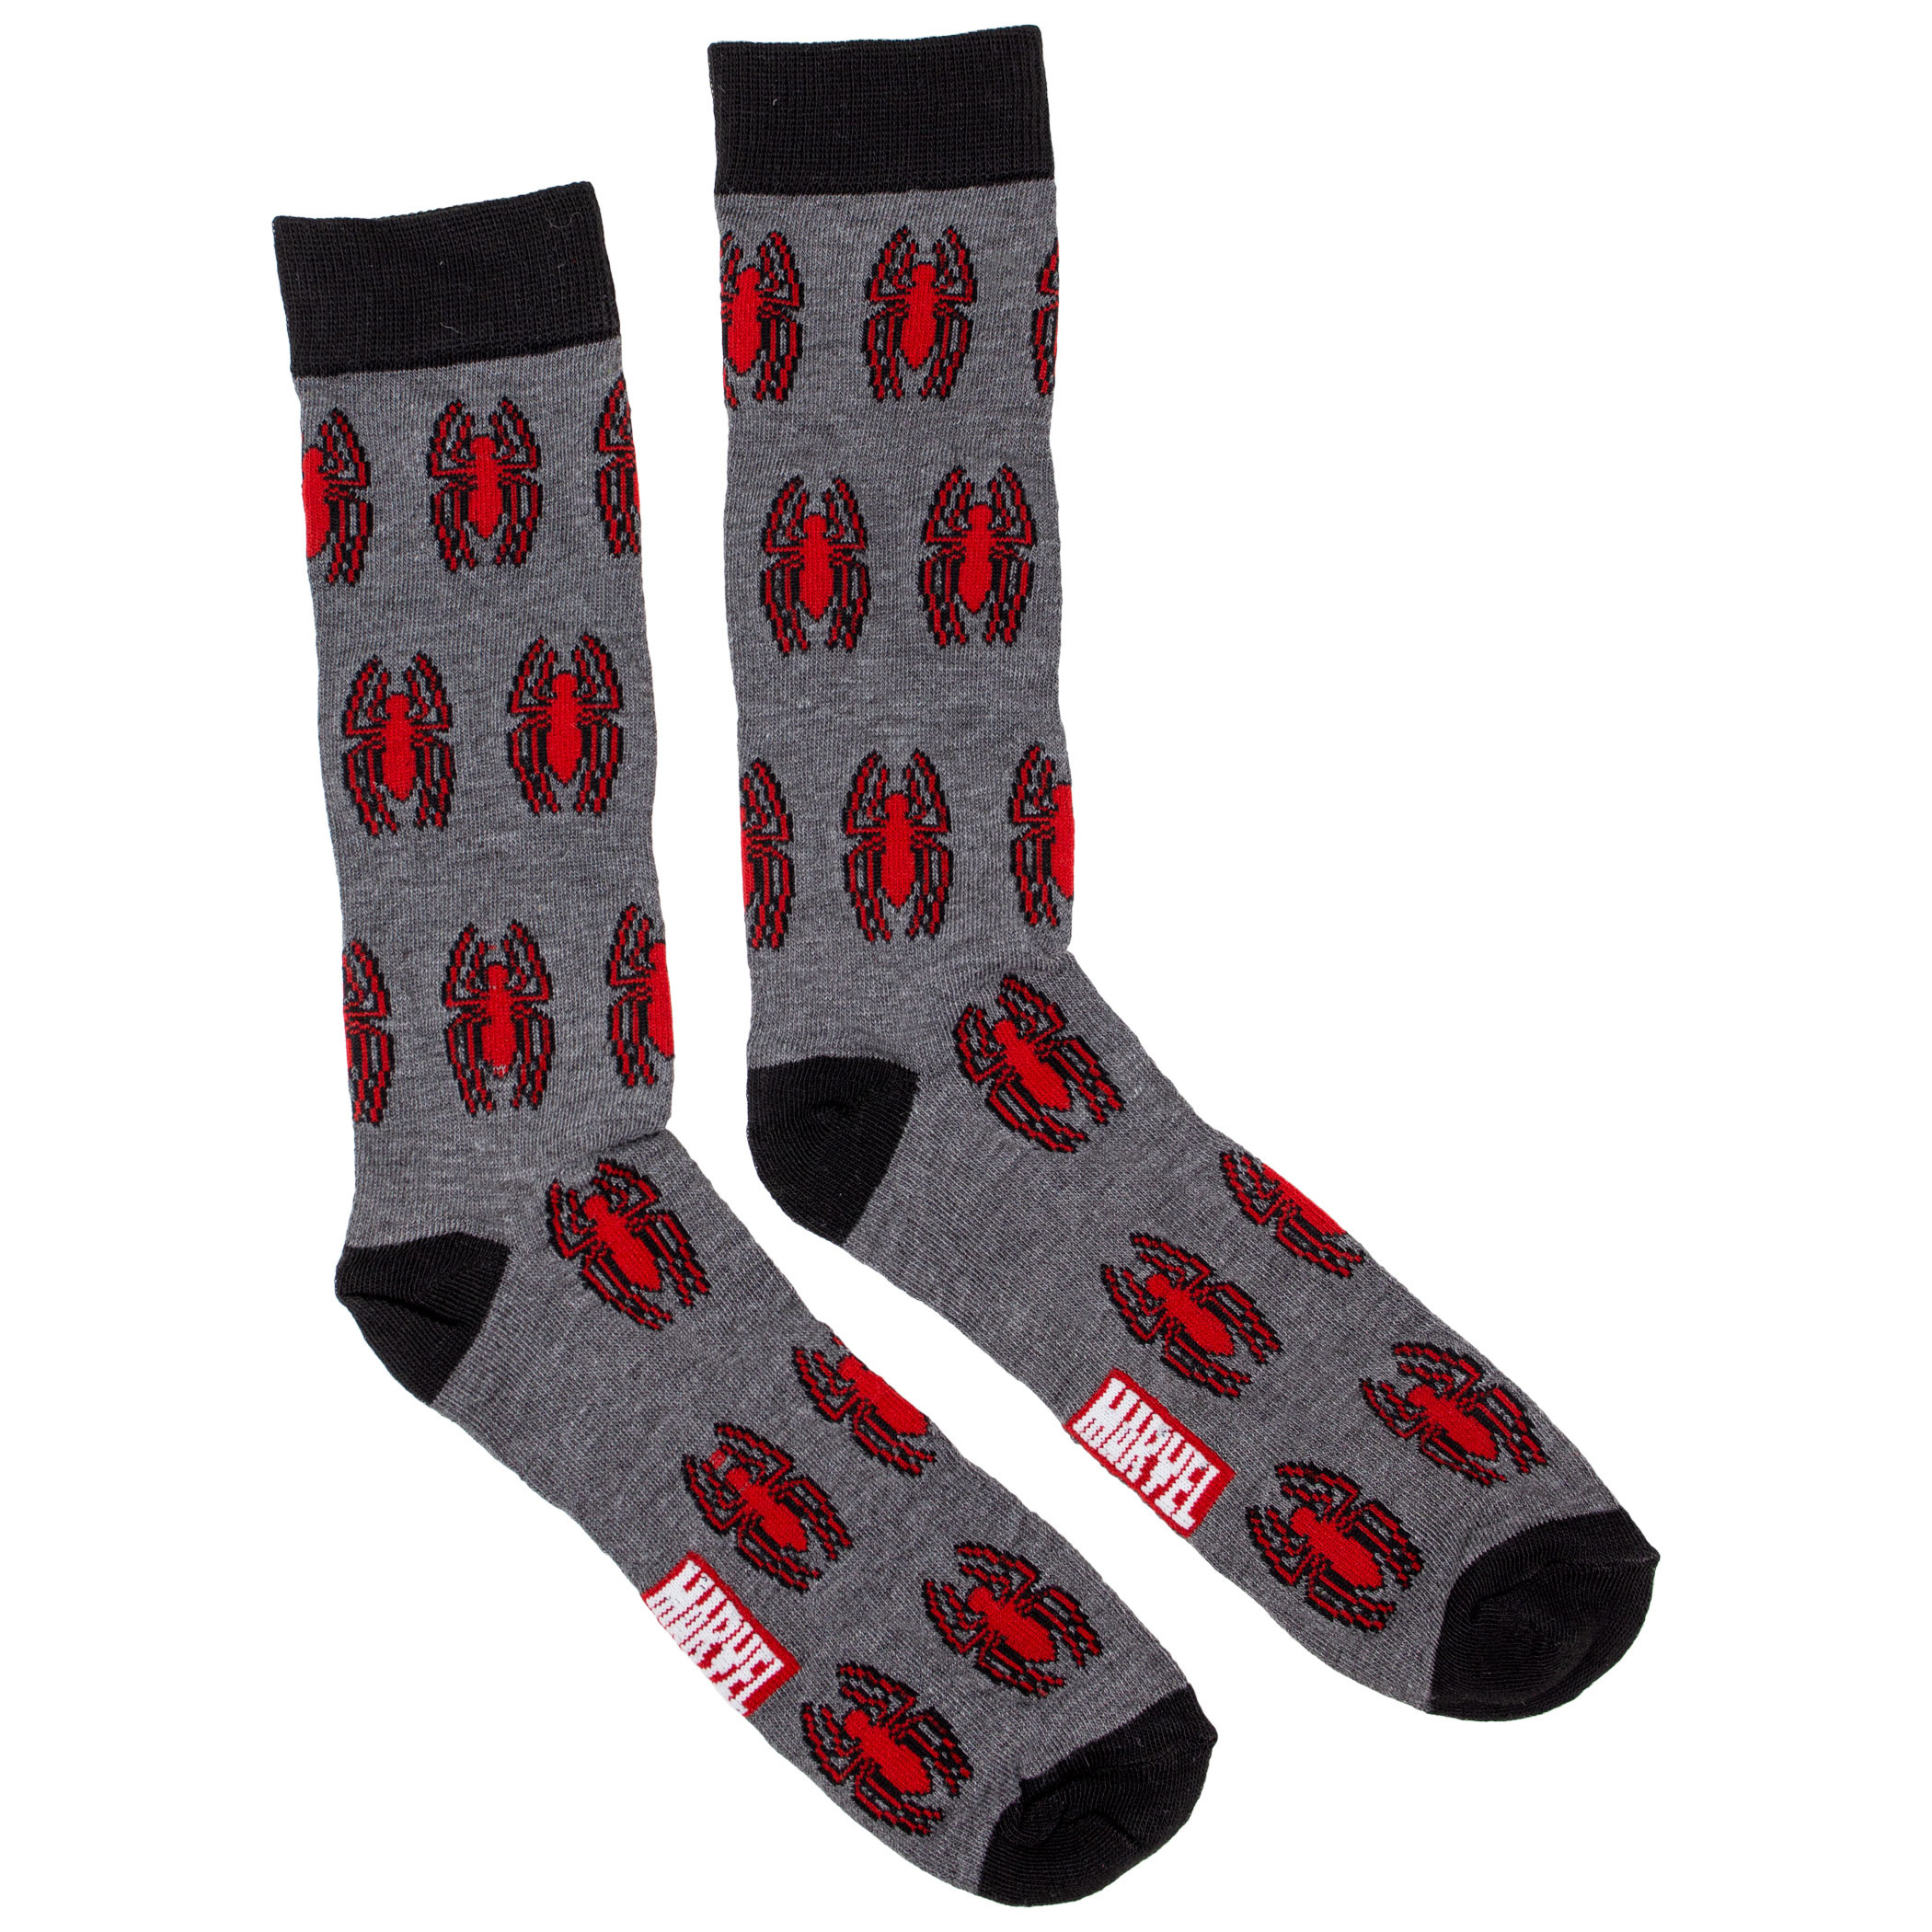 Spider-Man Face and Spider Symbol 2-Pair Pack of Casual Crew Socks